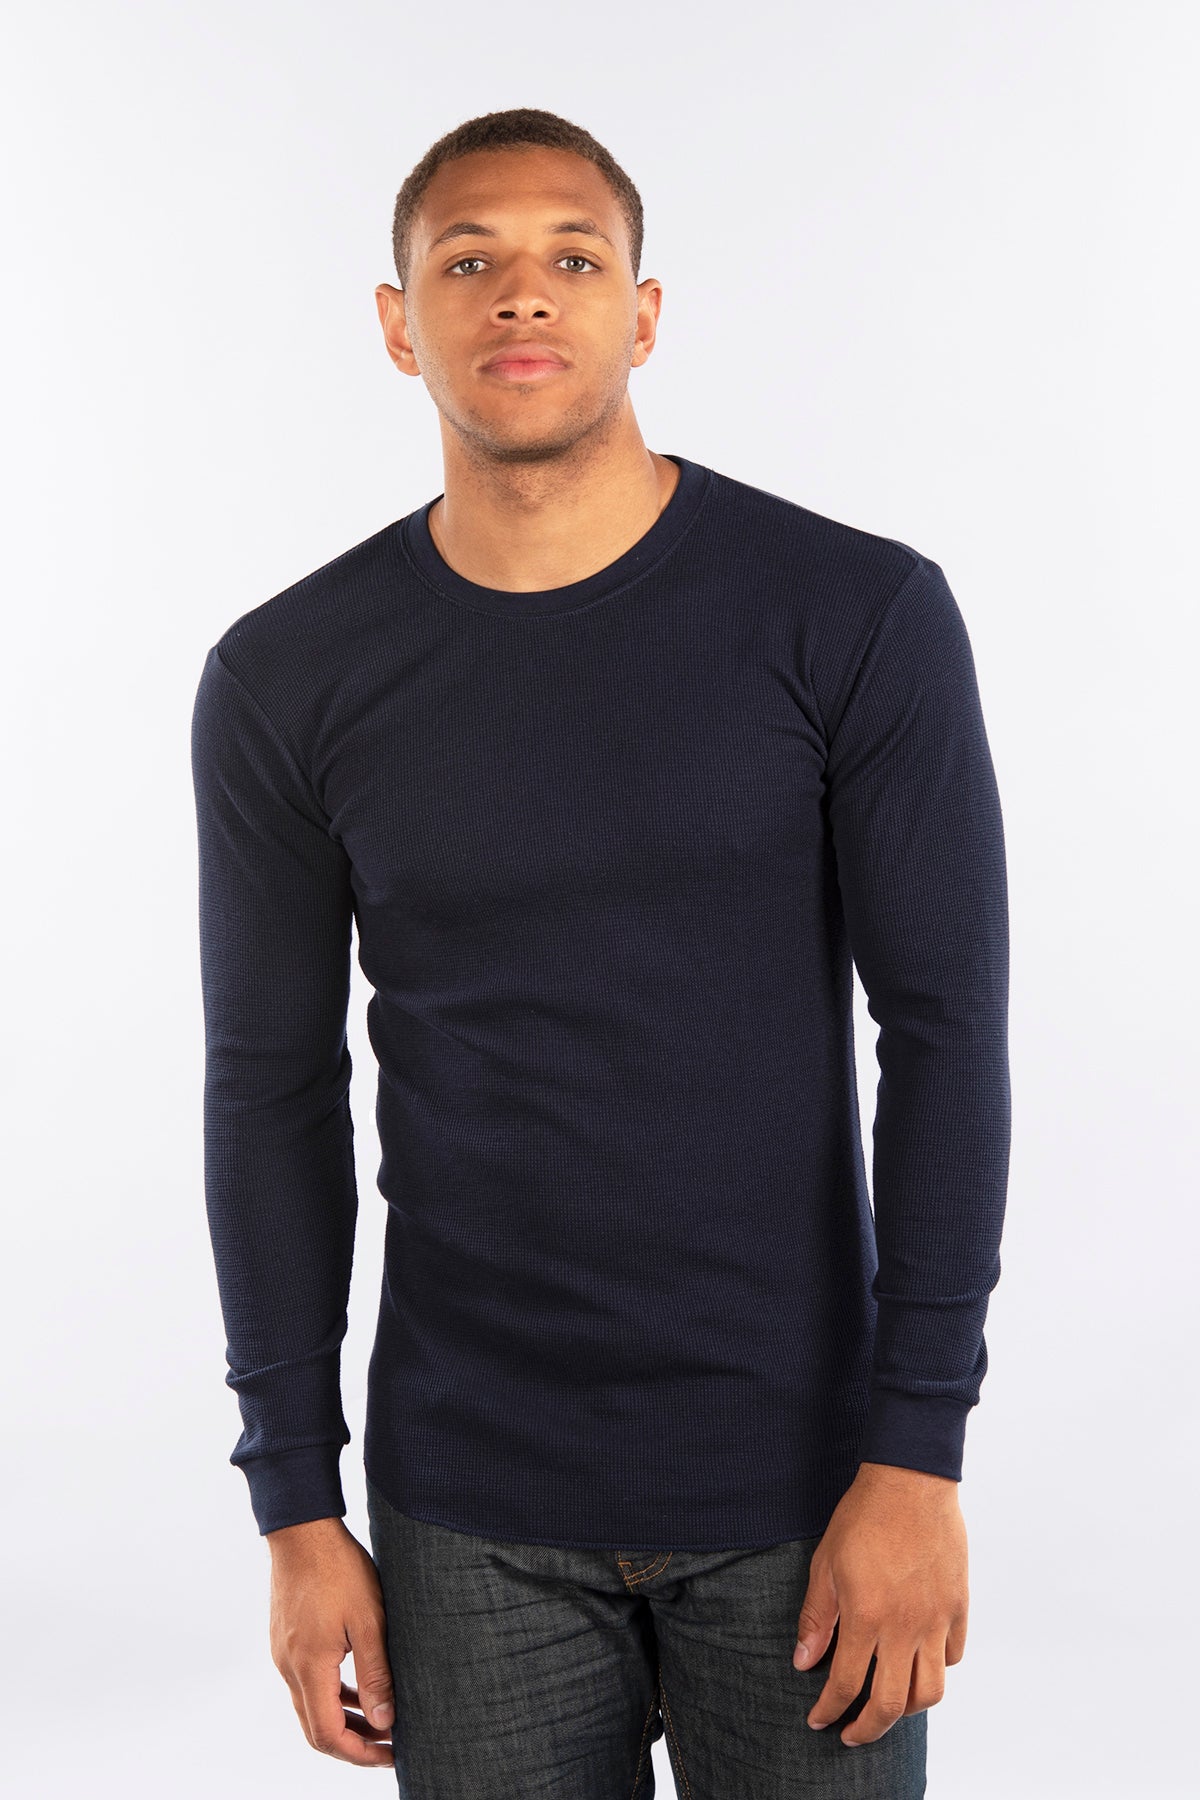 Long Sleeve Thermal Shirt - Cotton Best - Wholesale T shirts